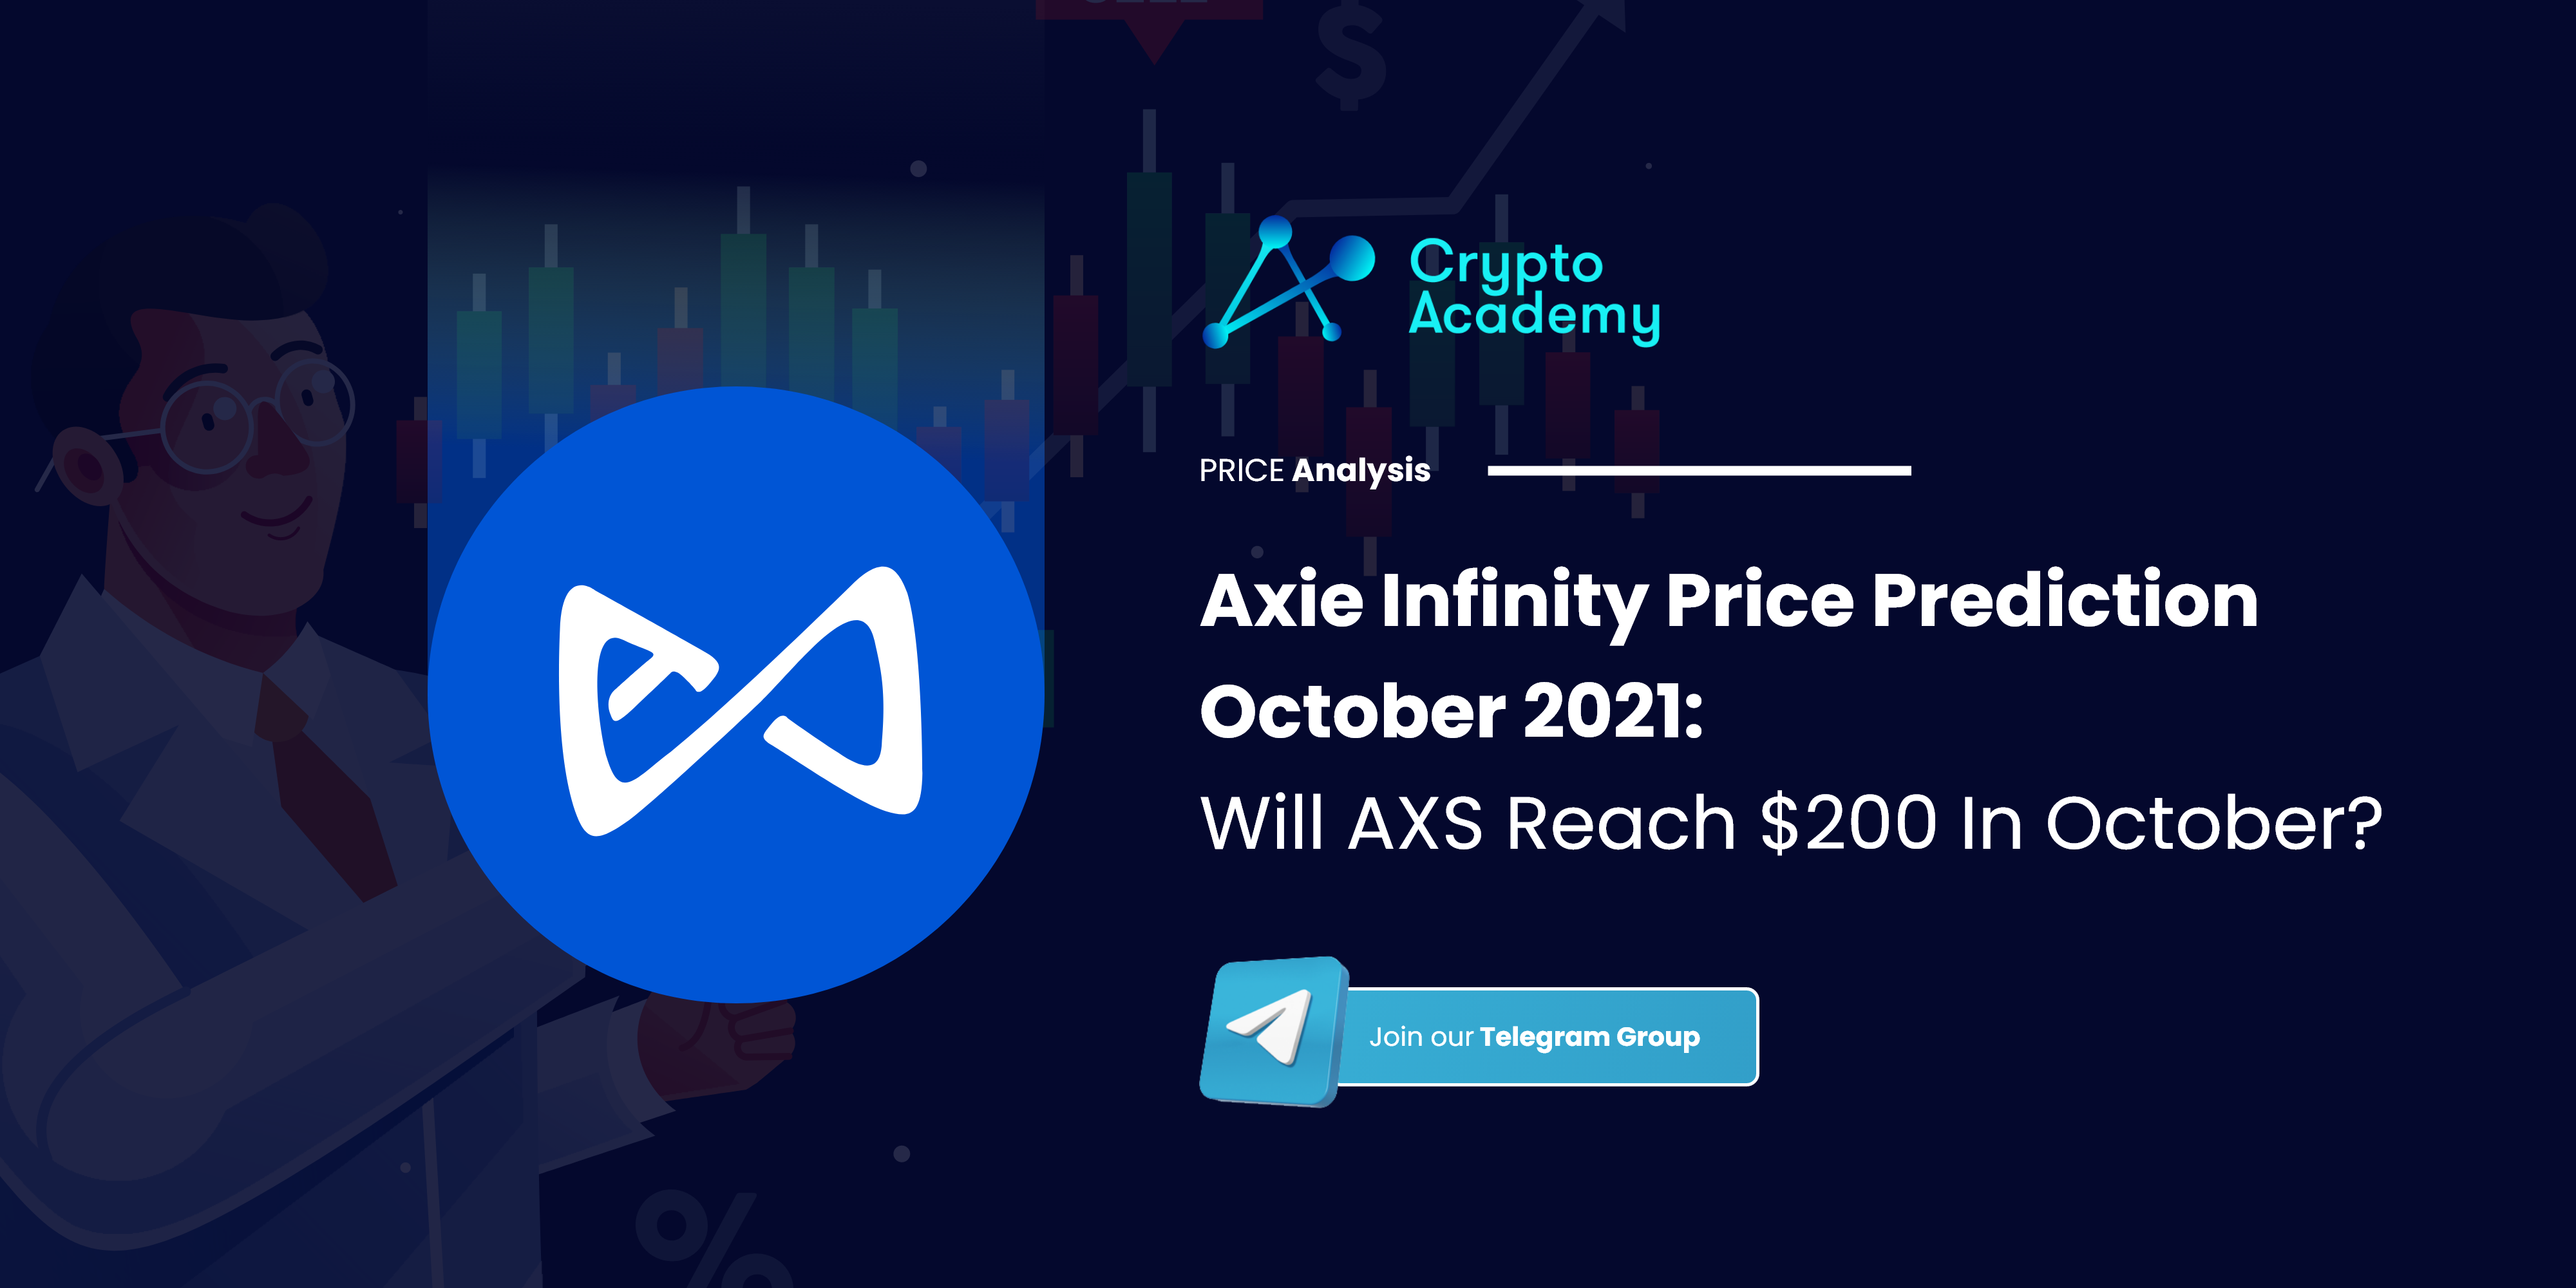 Axie Infinity Price Prediction October 2021: Will AXS Reach $200 In October